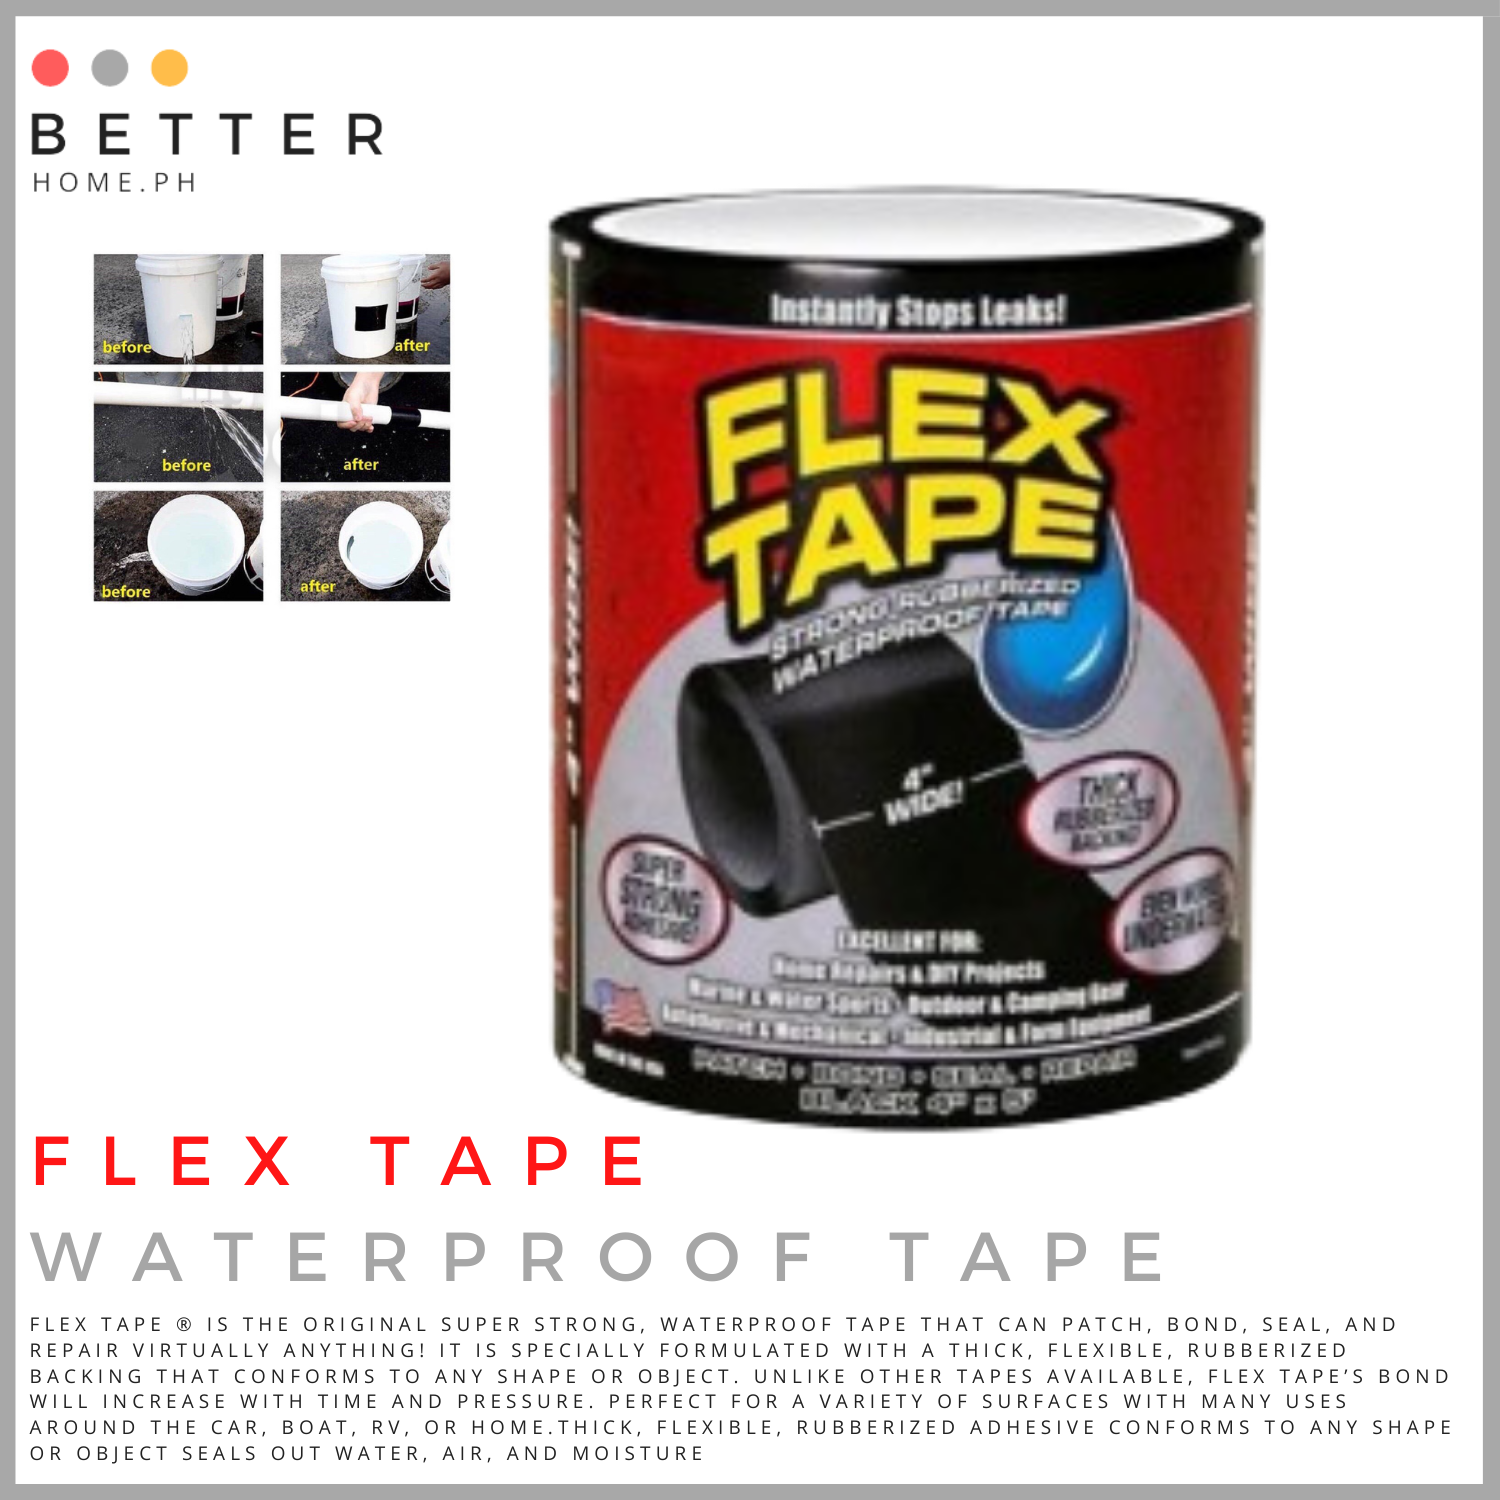 Rubberized Strong Waterproof Tape Instantly Stop Leaks Patch Bond Seal Repair 